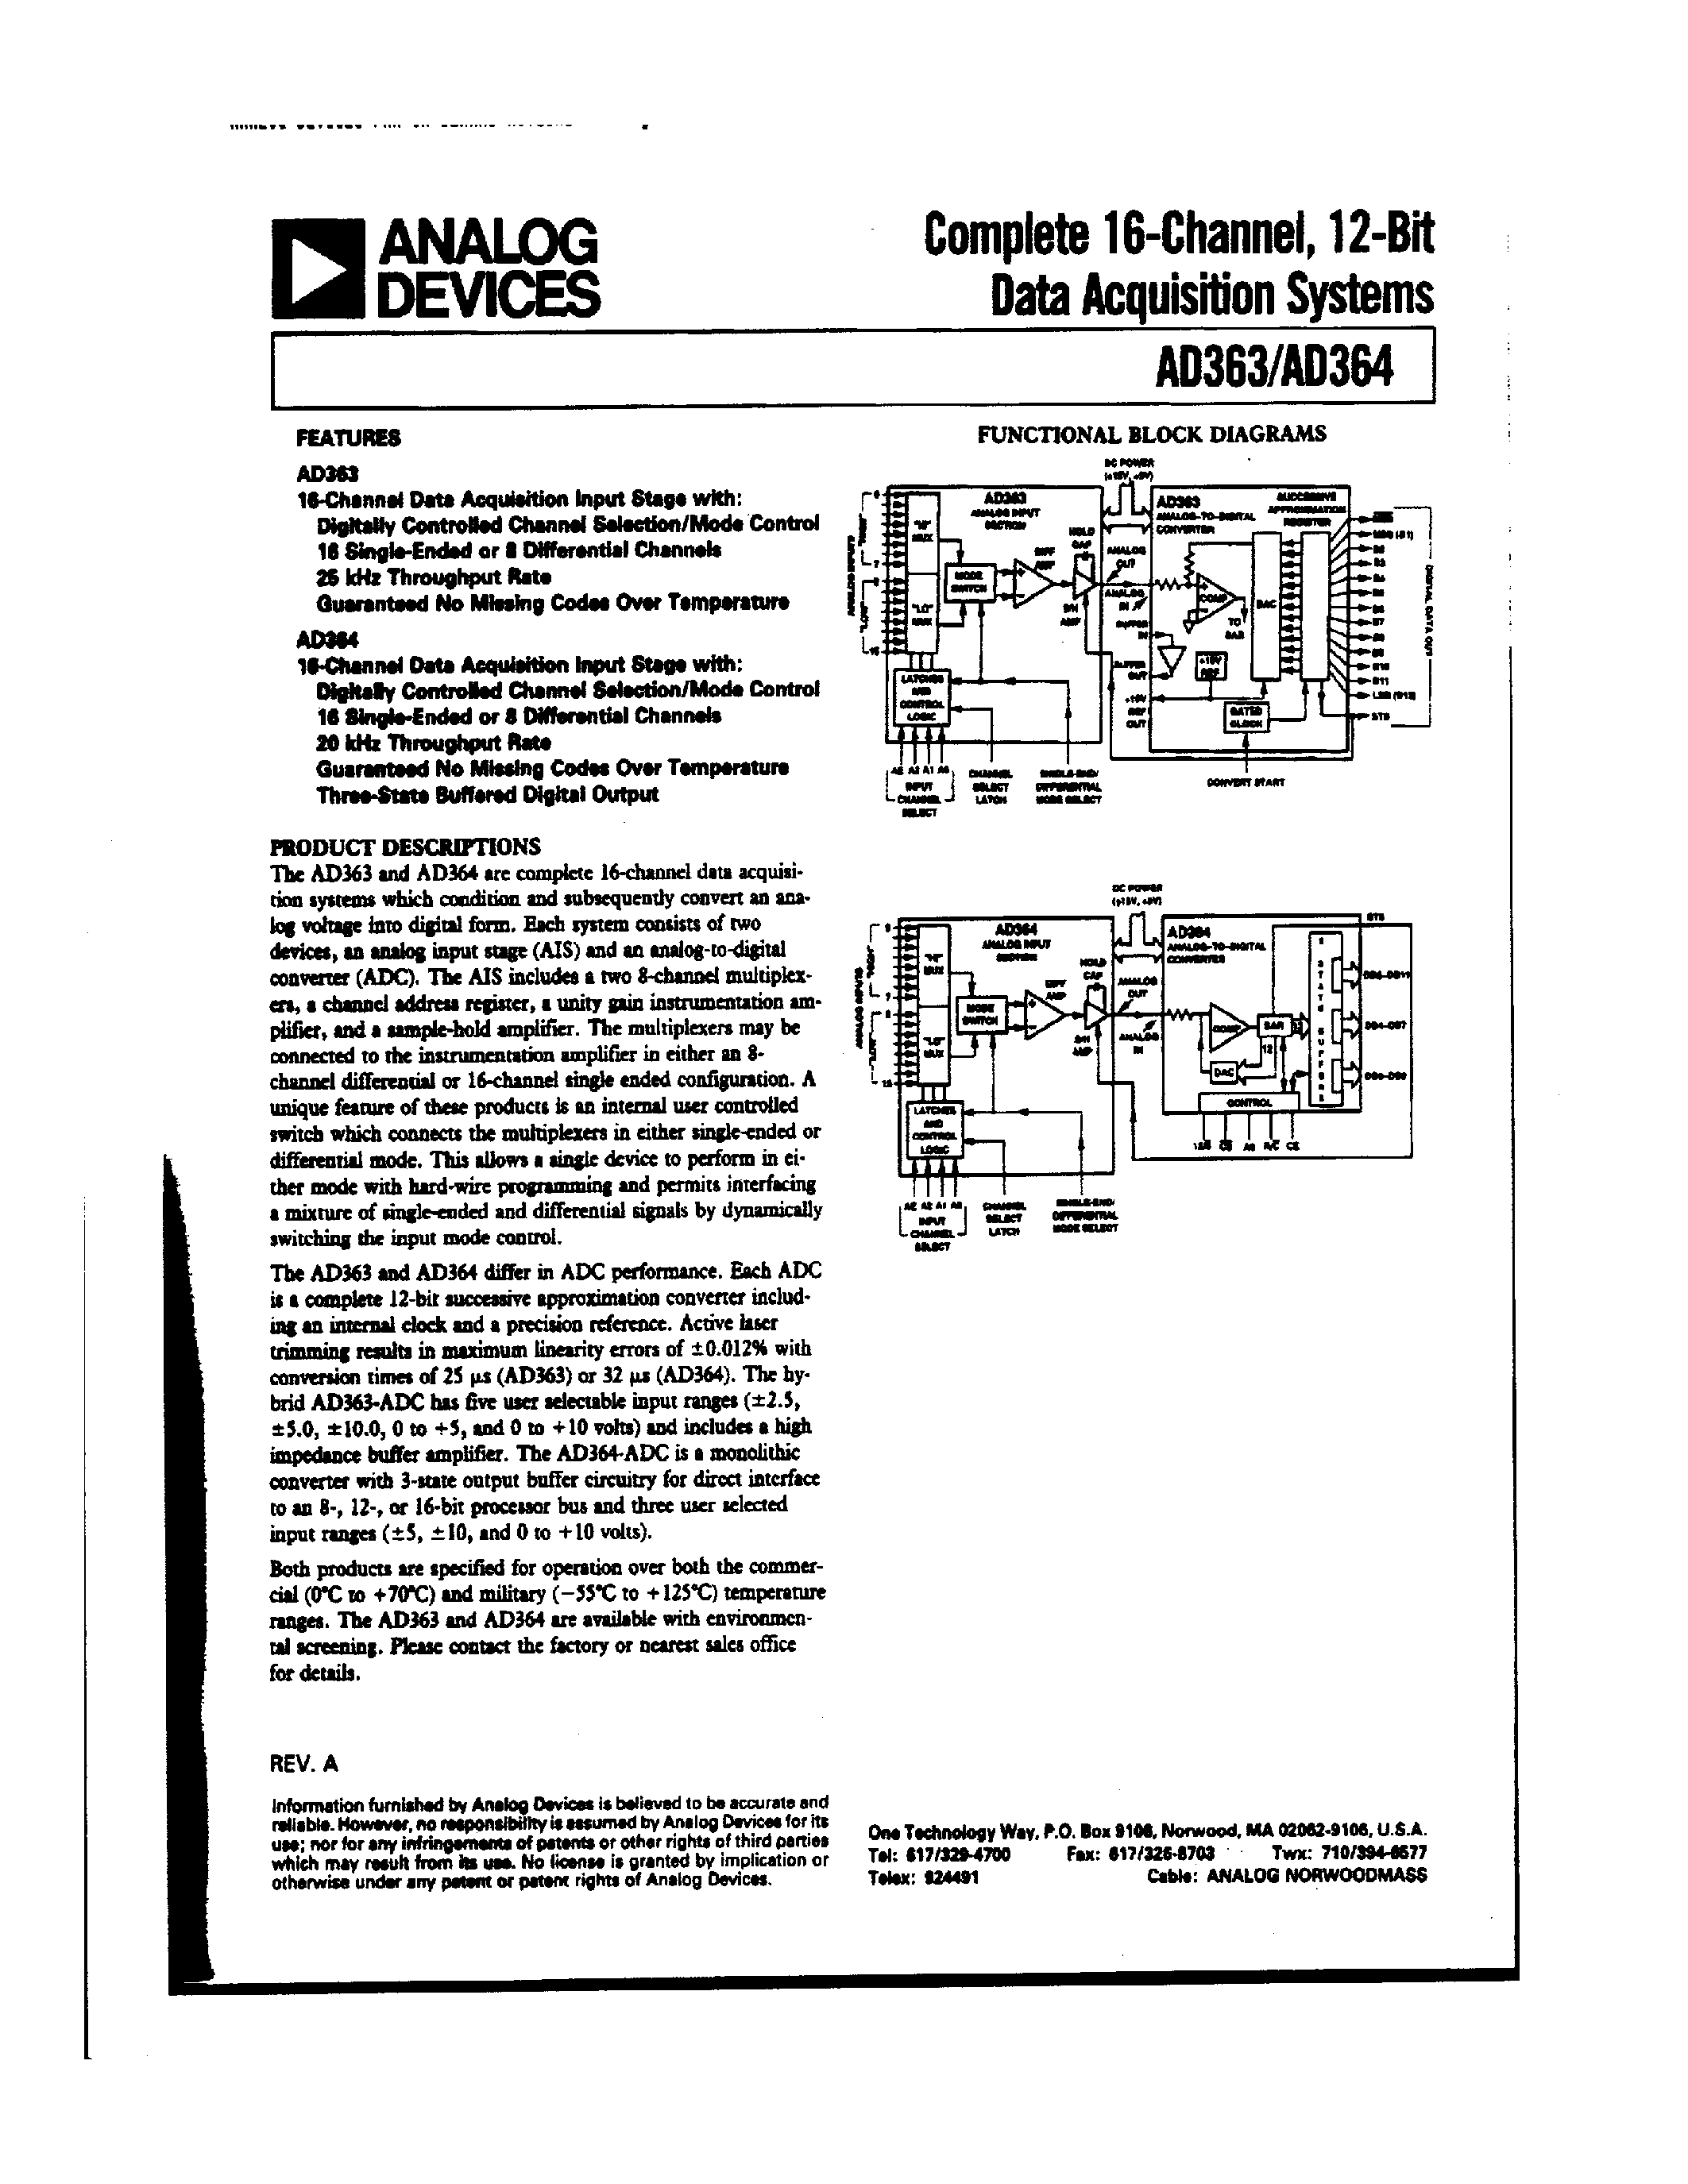 Datasheet AD363RS - Complete 16-Channel/12-Bit Data Acquisition System page 1